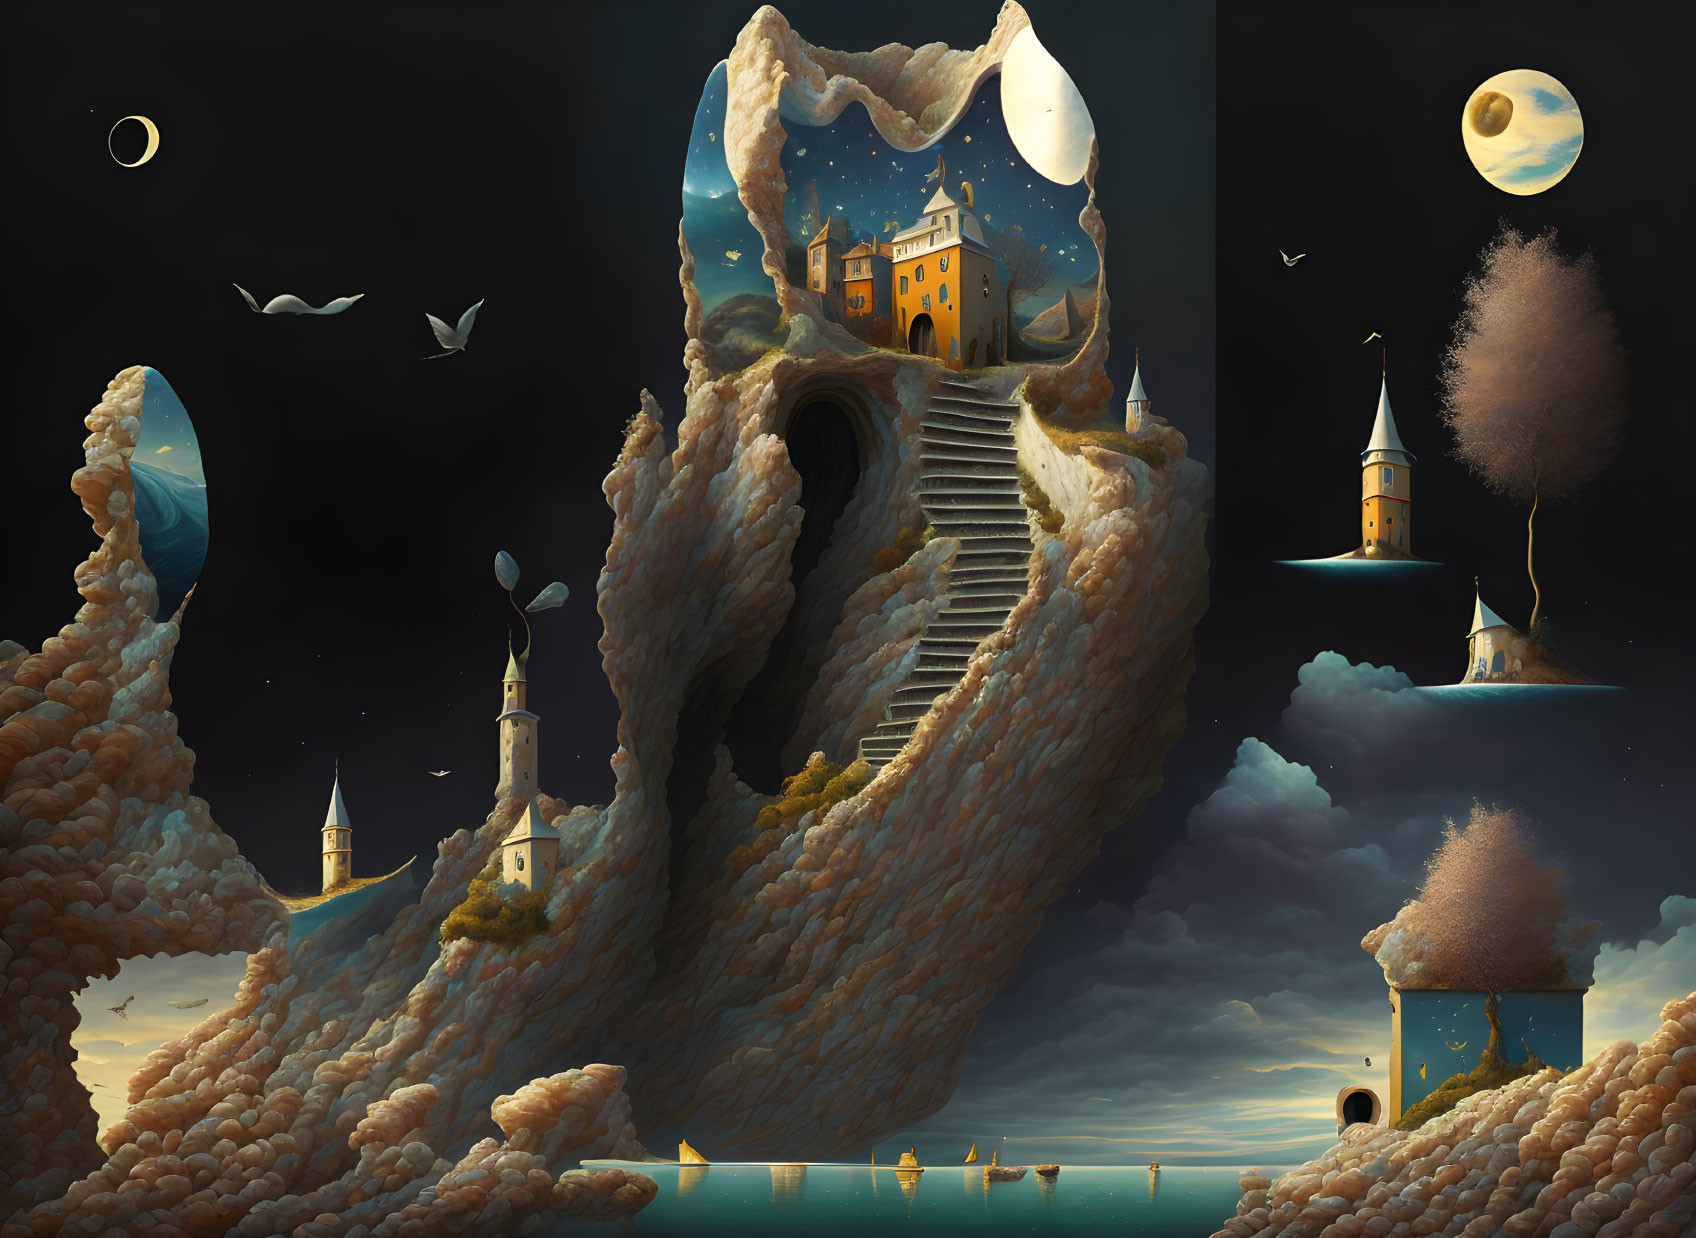 Surreal landscape with rocky staircase, whimsical buildings, crescent moon, floating islands, birds